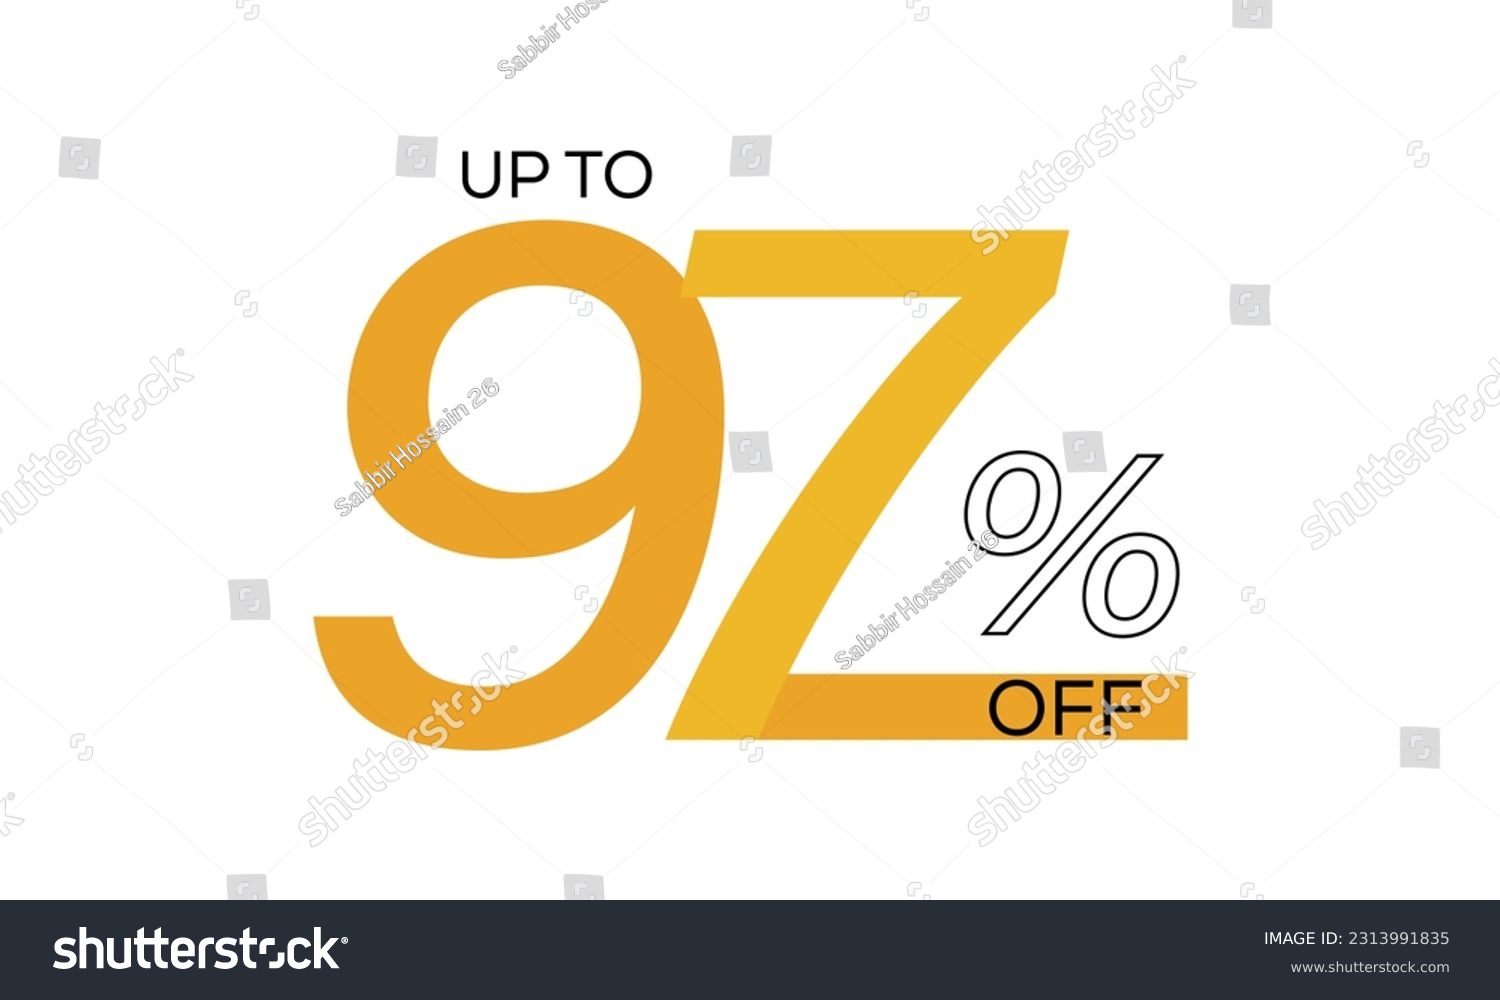 SVG of up to 97% off vector template, 97% off discount, 97 percent off discount sale background svg